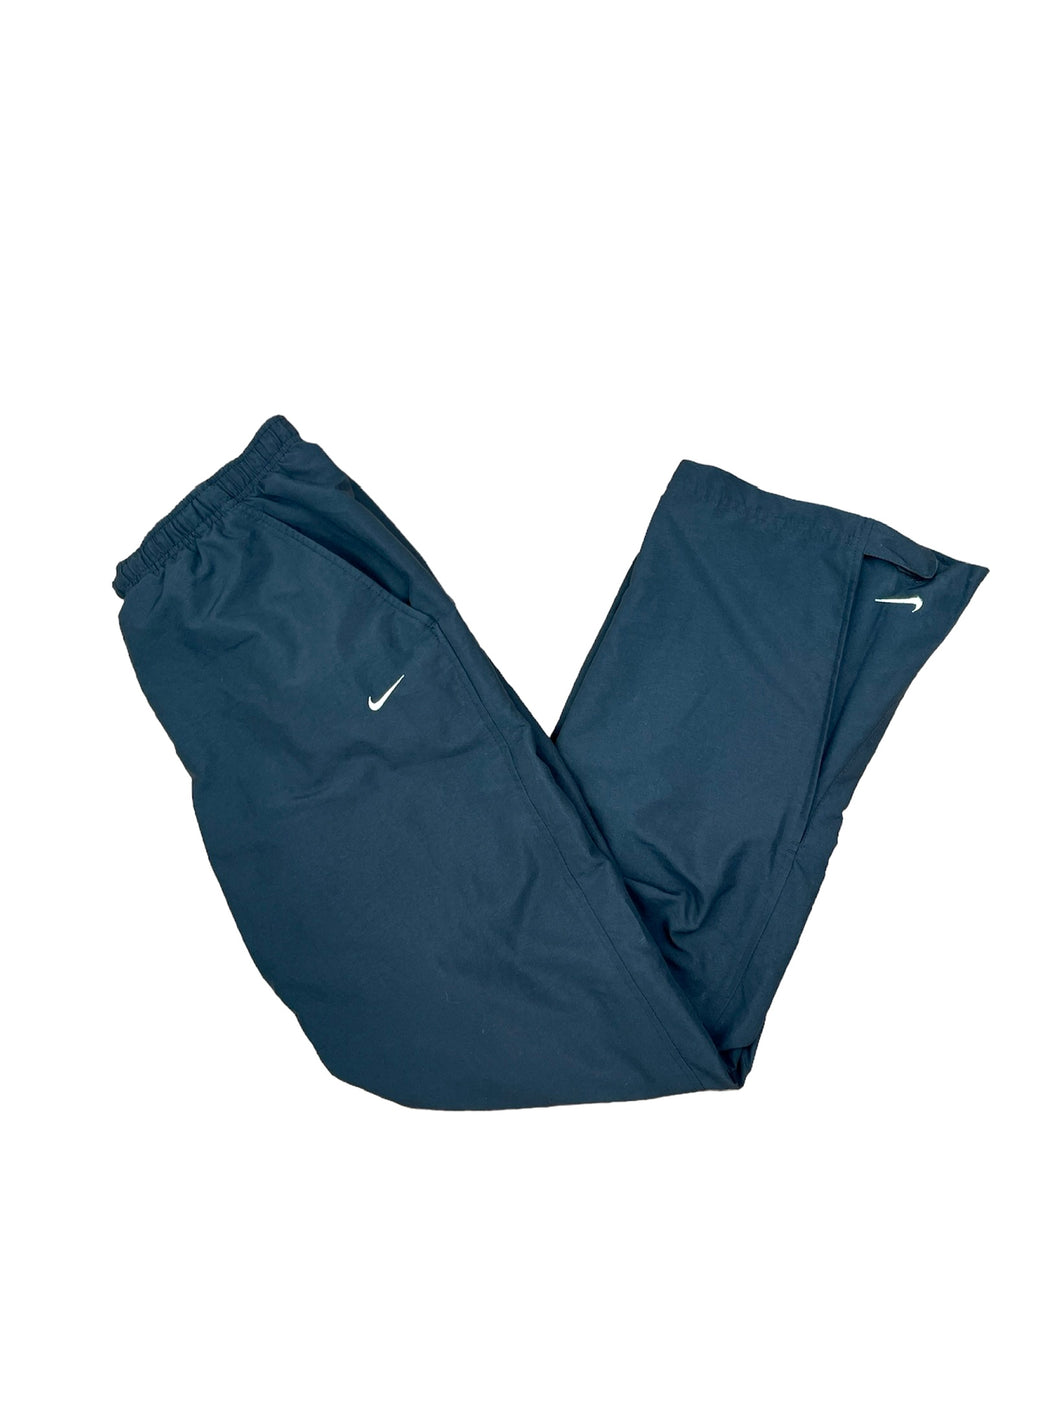 Nike Baggy Track Pant - Large